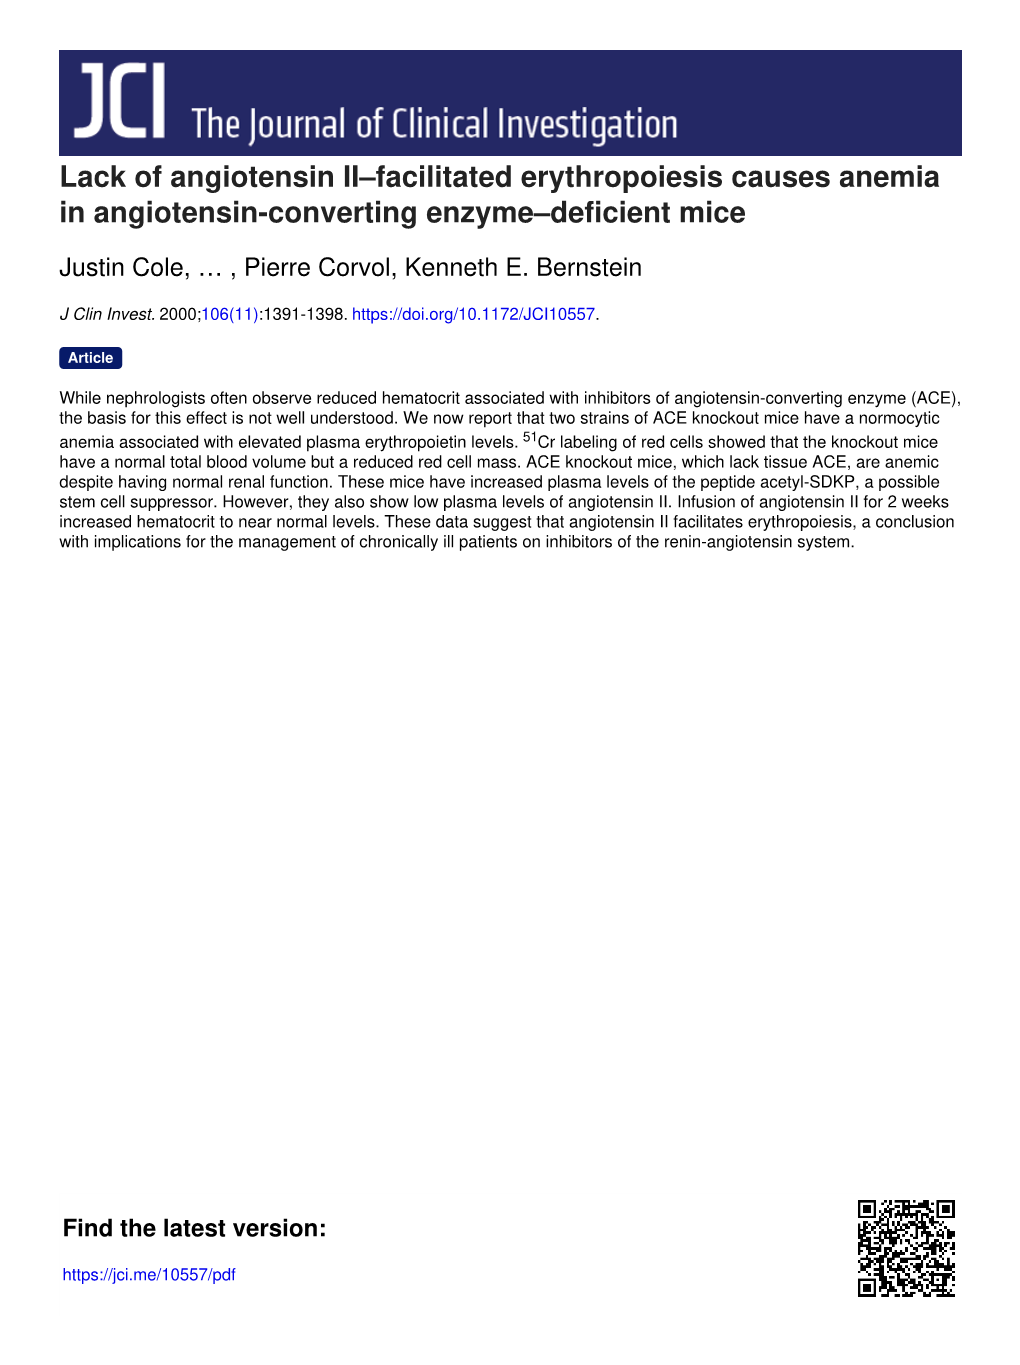 Lack of Angiotensin II–Facilitated Erythropoiesis Causes Anemia in Angiotensin-Converting Enzyme–Deficient Mice